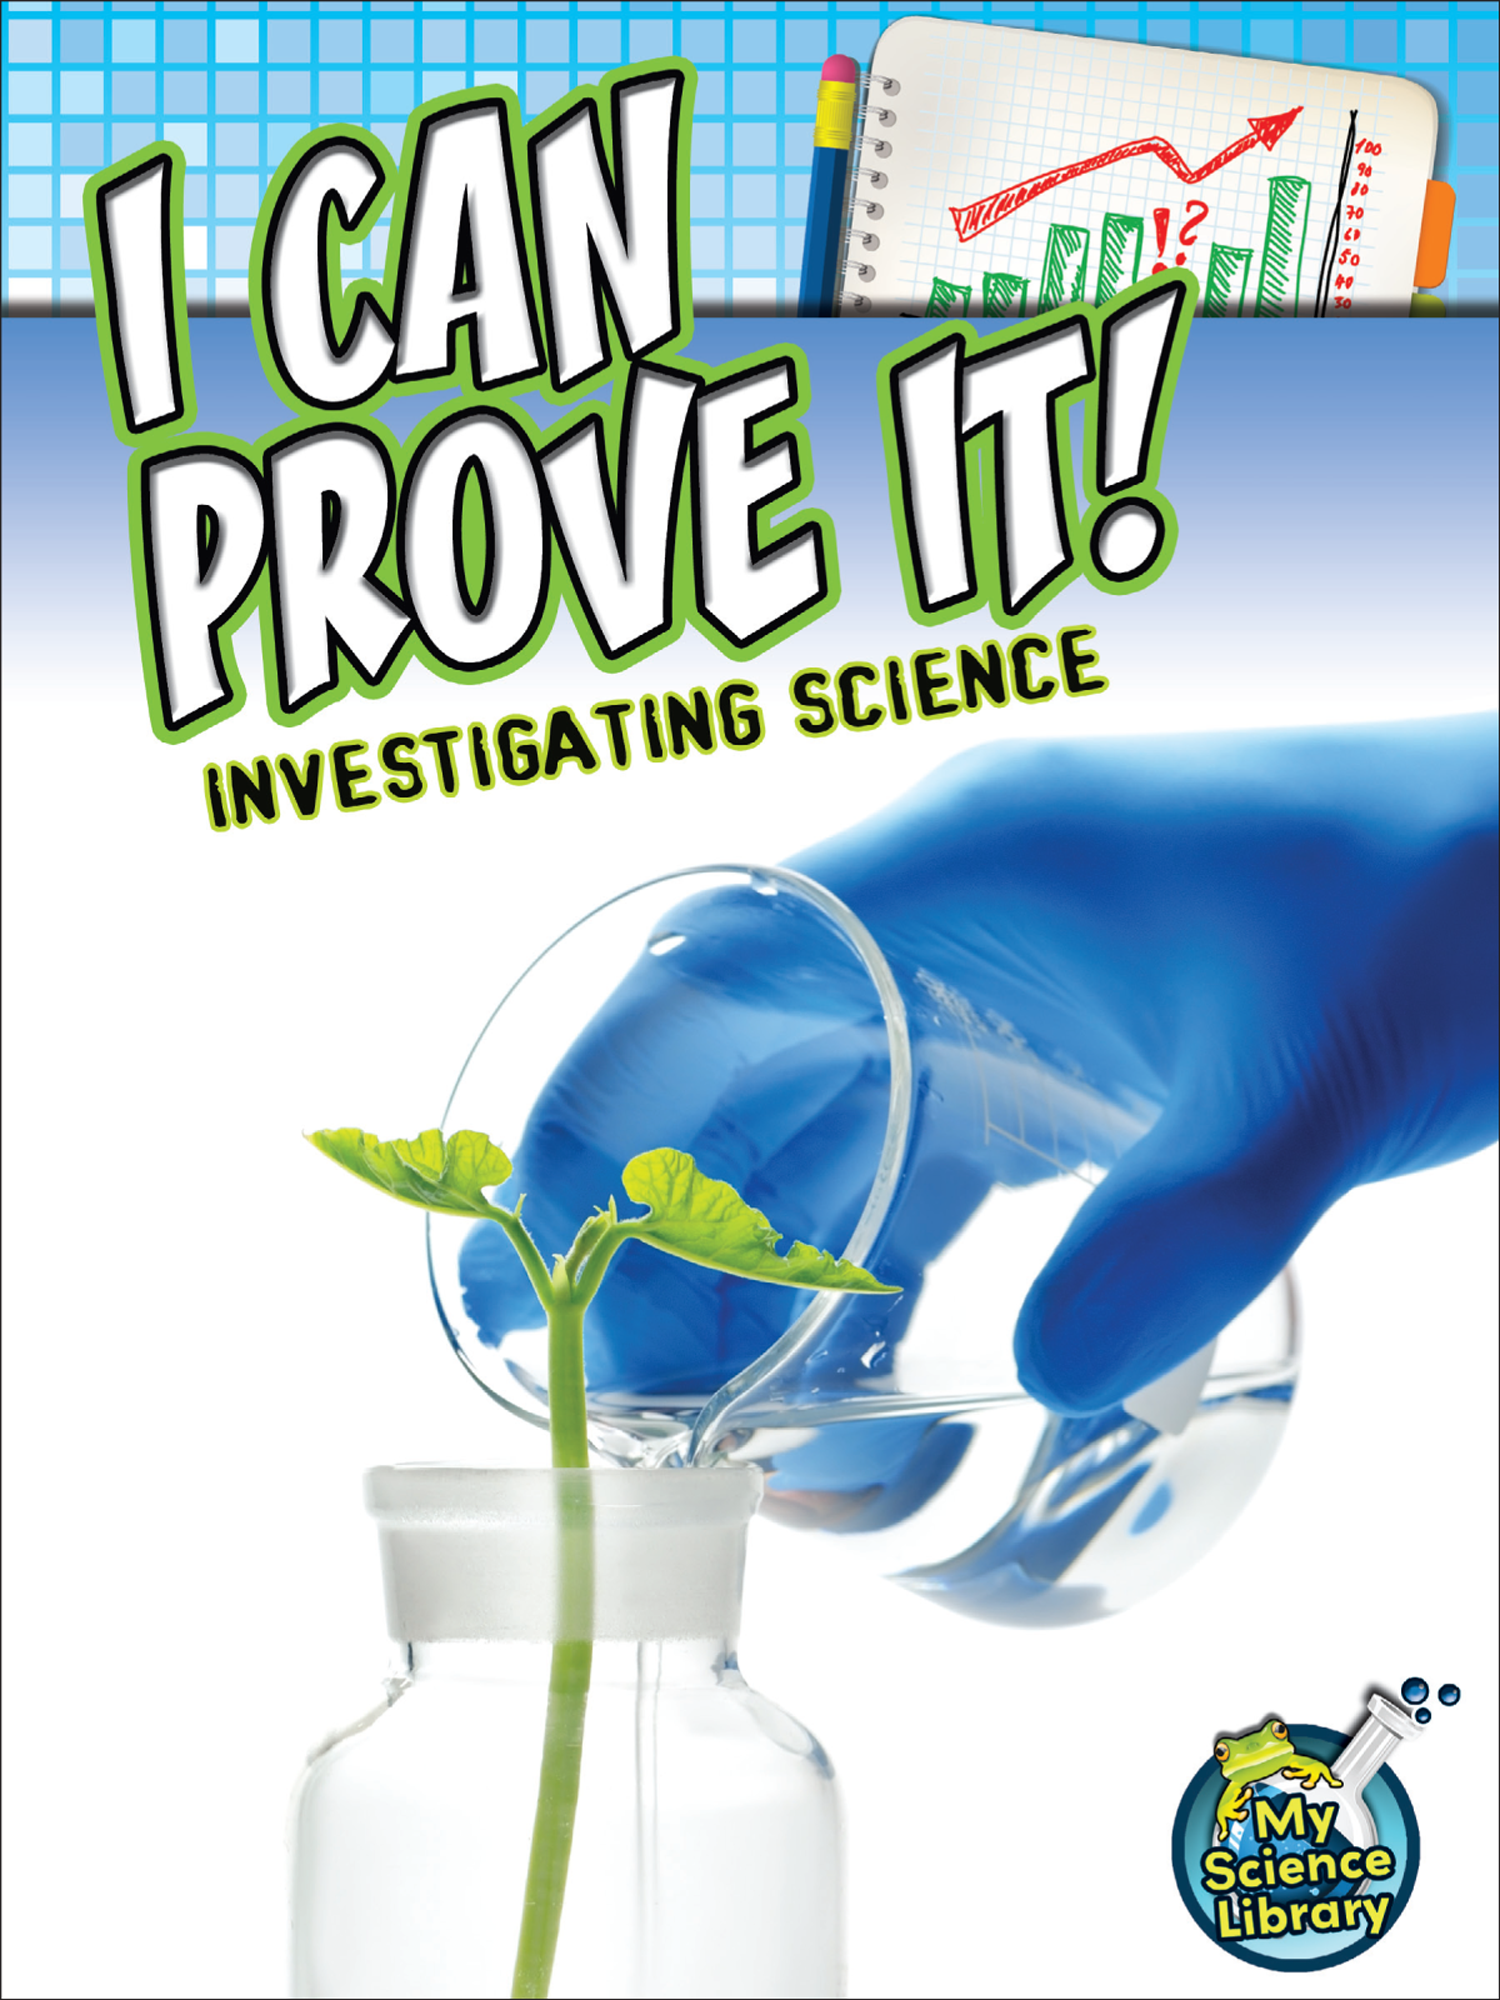 I Can Prove It! Investigating Science - TCR102447 | Teacher Created